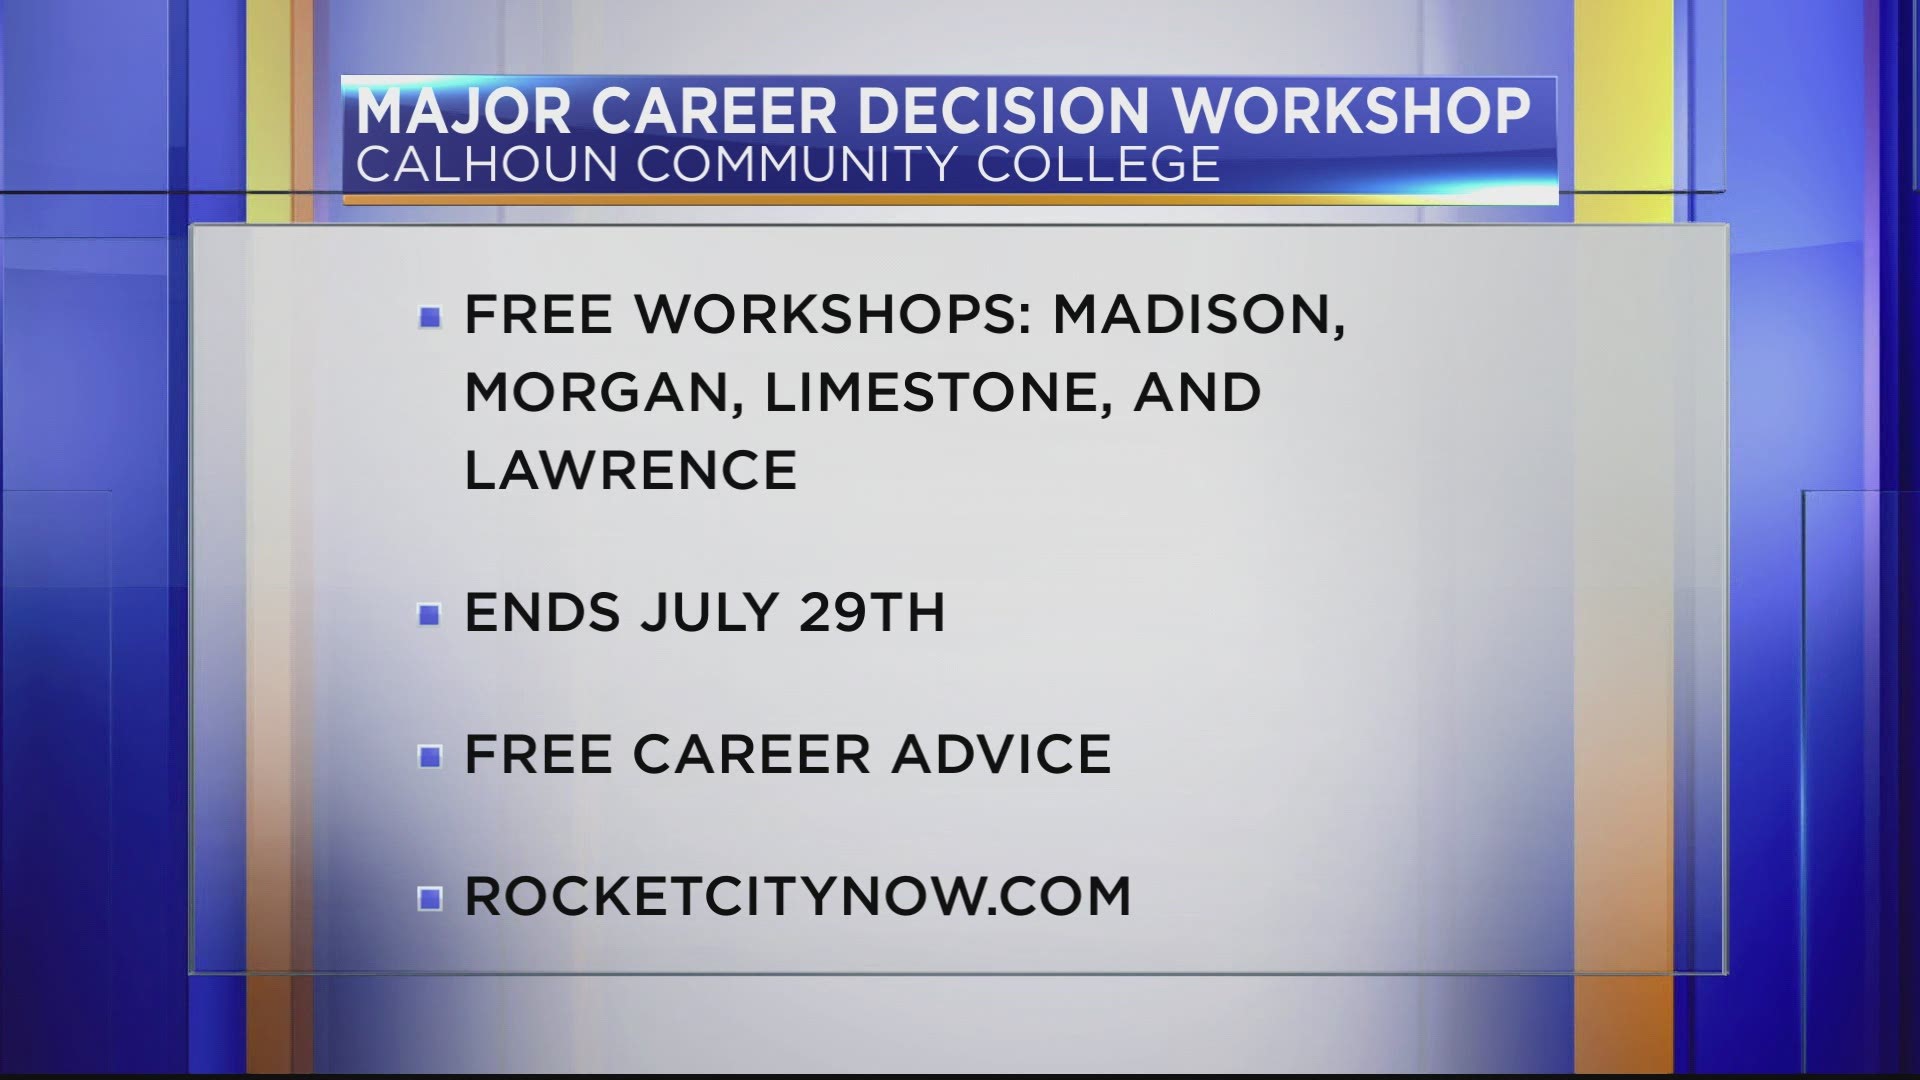 Calhoun Community College is hosting a series of workshops for anyone contemplating a major life decision.